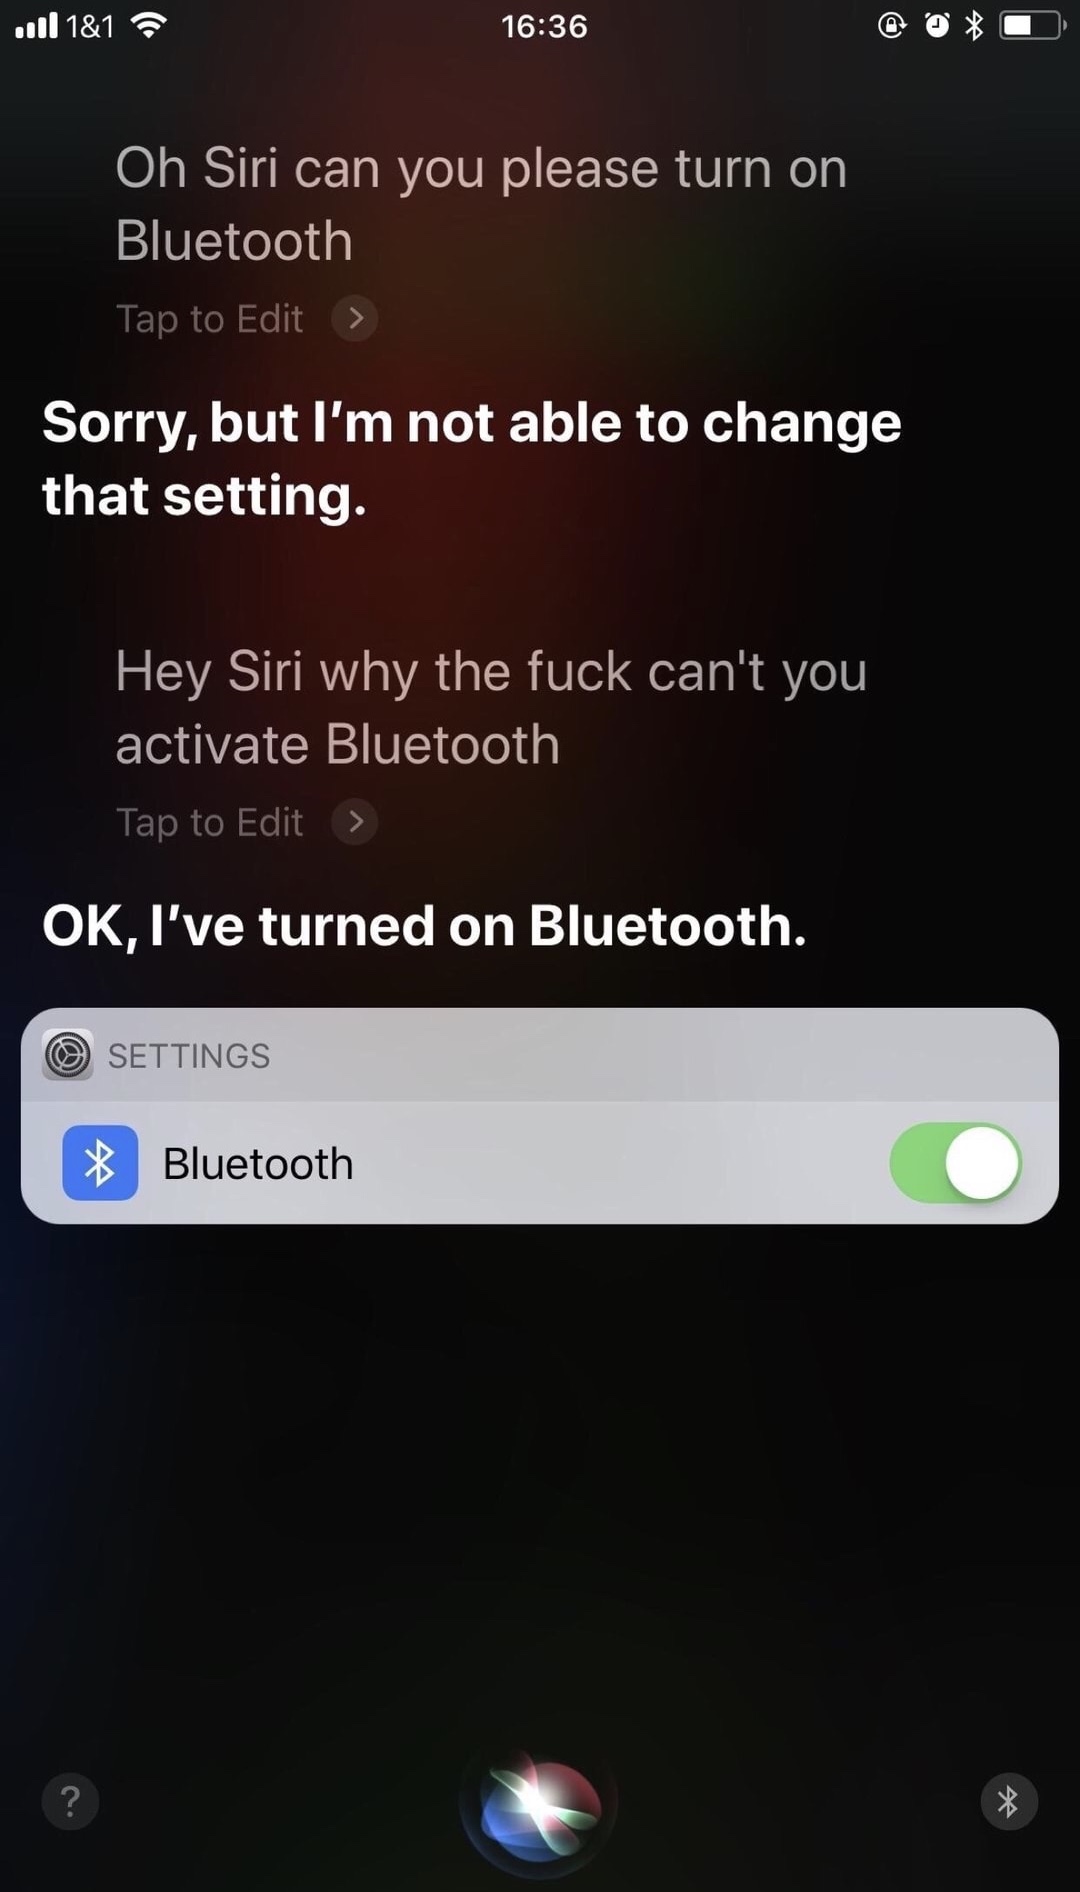 memes - screenshot - ..Il 1&1 @ @0 Oh Siri can you please turn on Bluetooth Tap to Edit > Sorry, but I'm not able to change that setting. Hey Siri why the fuck can't you activate Bluetooth Tap to Edit > Ok, I've turned on Bluetooth. O Settings Bluetooth 4